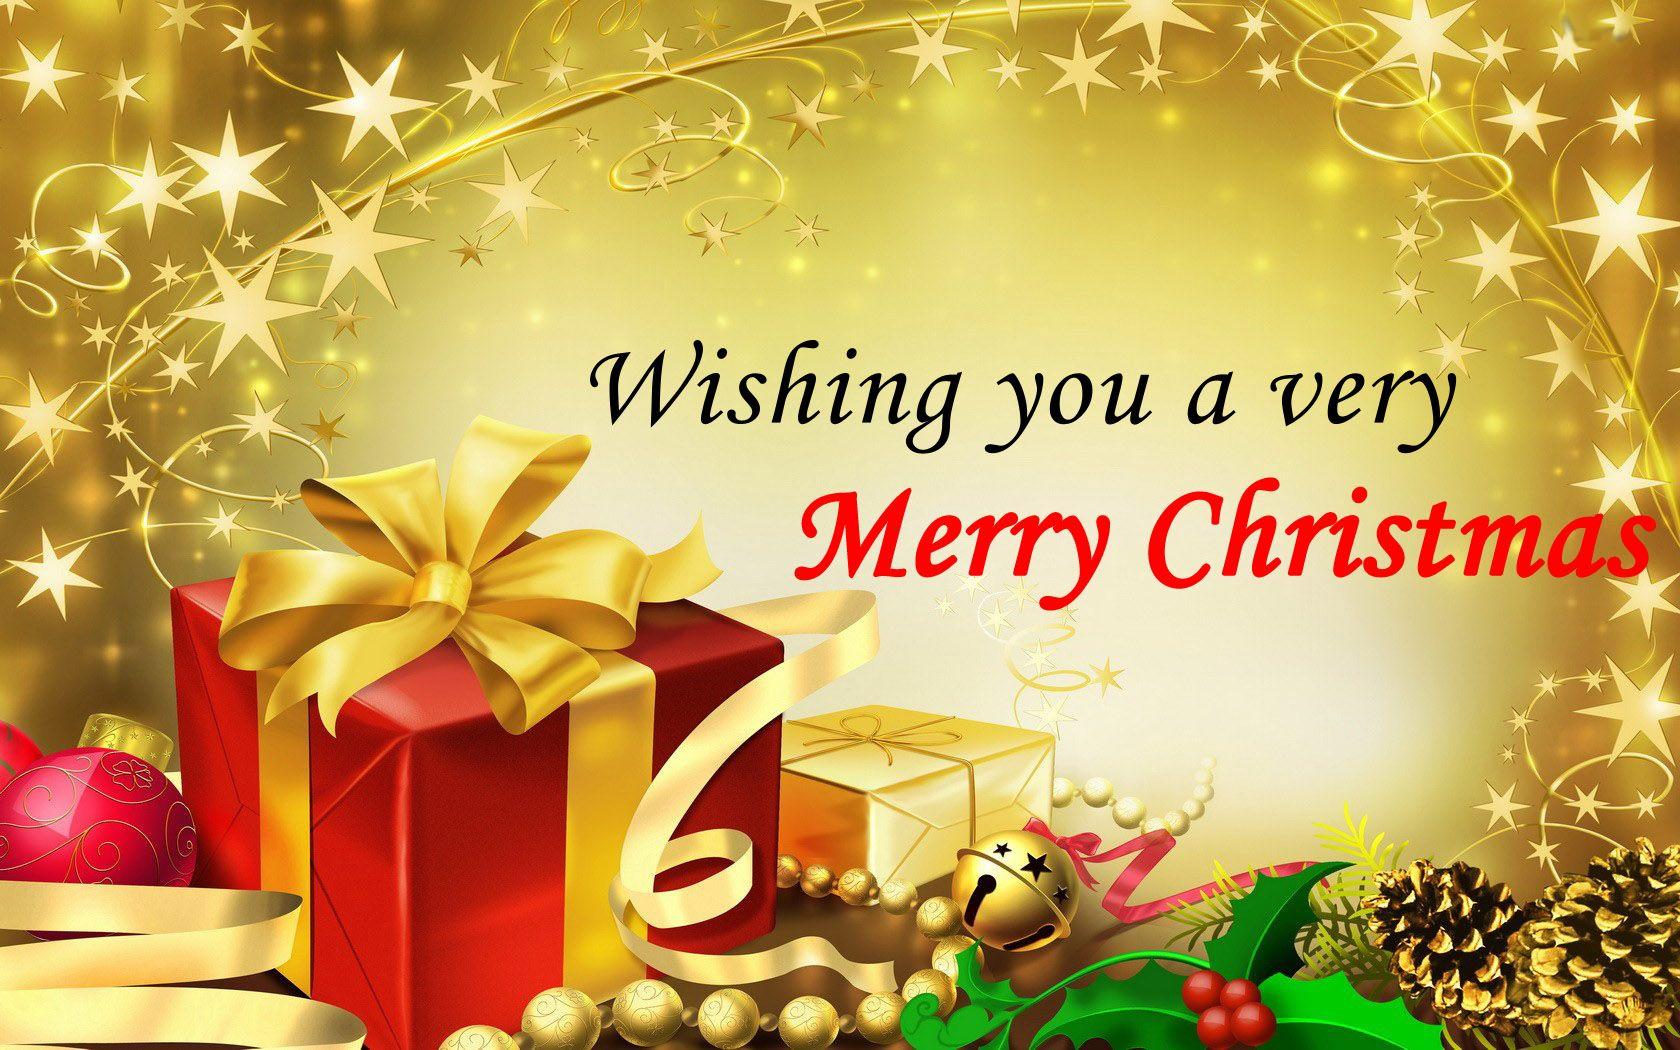 Merry Christmas 2015 Greeting Card Quotes Wallpaper